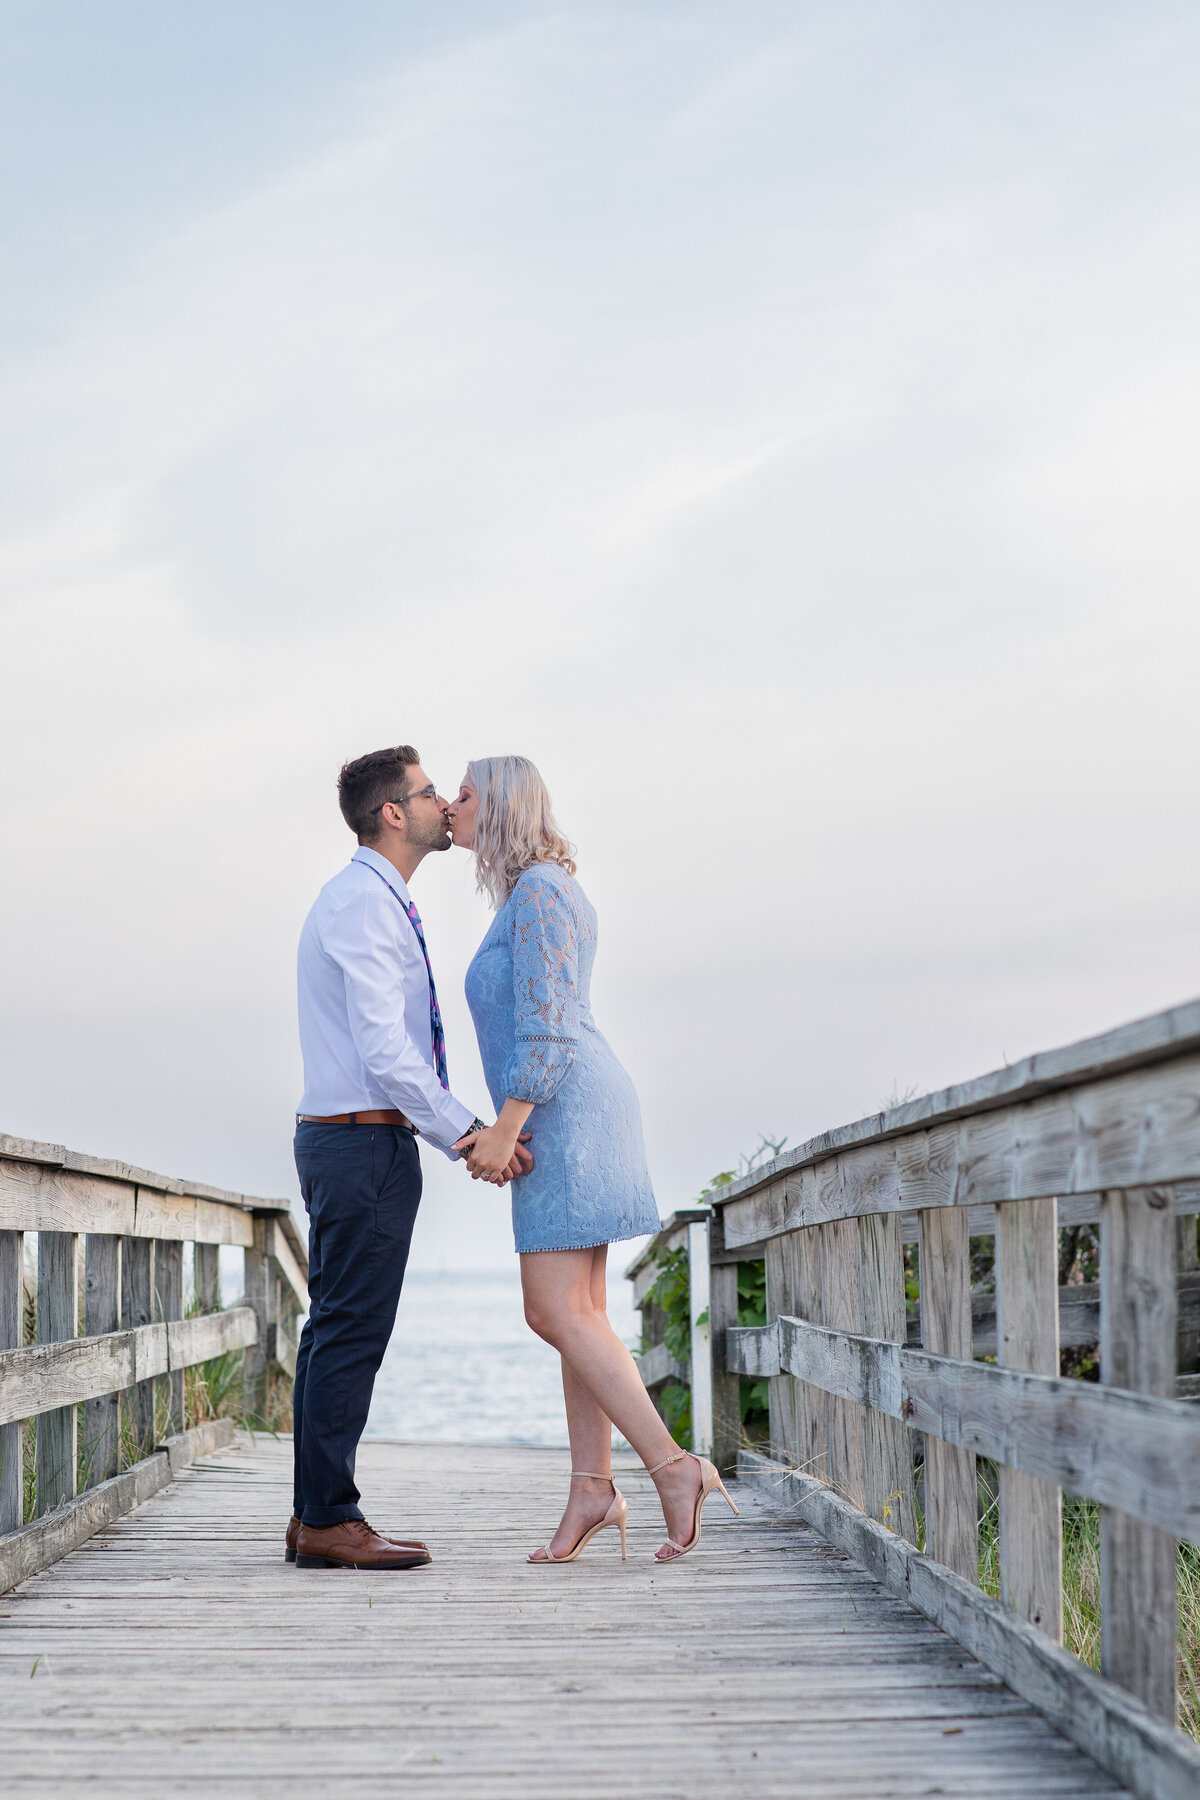 Harkness-Memorial-Park-engagement-session-Kelly-Pomeroy-Photography-Marissa-Mike--212